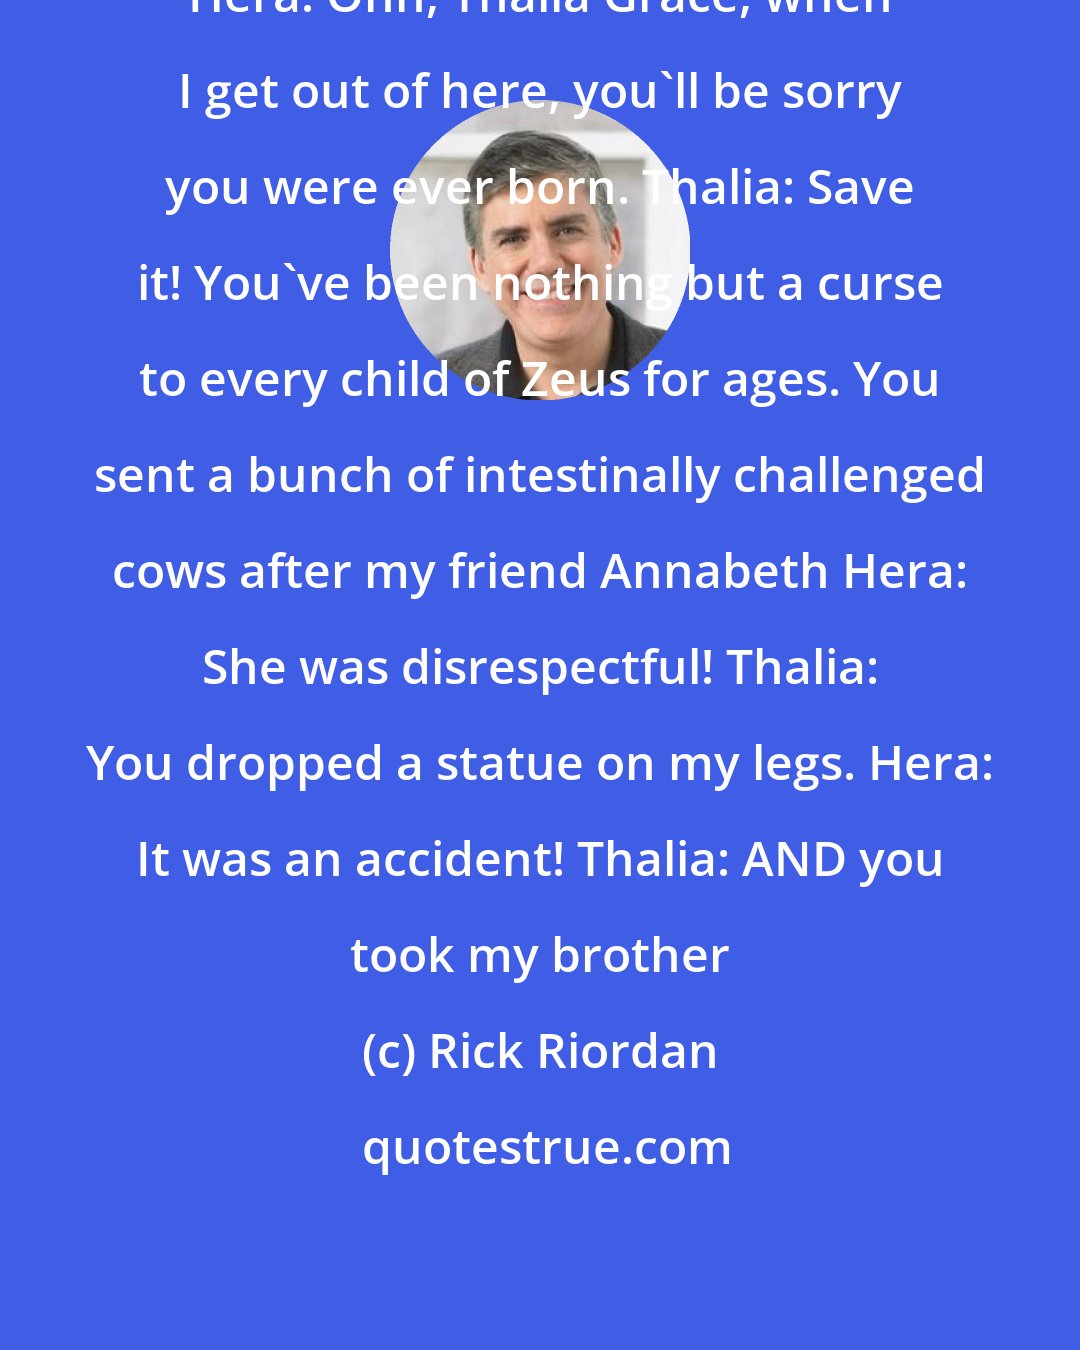 Rick Riordan: Hera: Ohh, Thalia Grace, when I get out of here, you'll be sorry you were ever born. Thalia: Save it! You've been nothing but a curse to every child of Zeus for ages. You sent a bunch of intestinally challenged cows after my friend Annabeth Hera: She was disrespectful! Thalia: You dropped a statue on my legs. Hera: It was an accident! Thalia: AND you took my brother